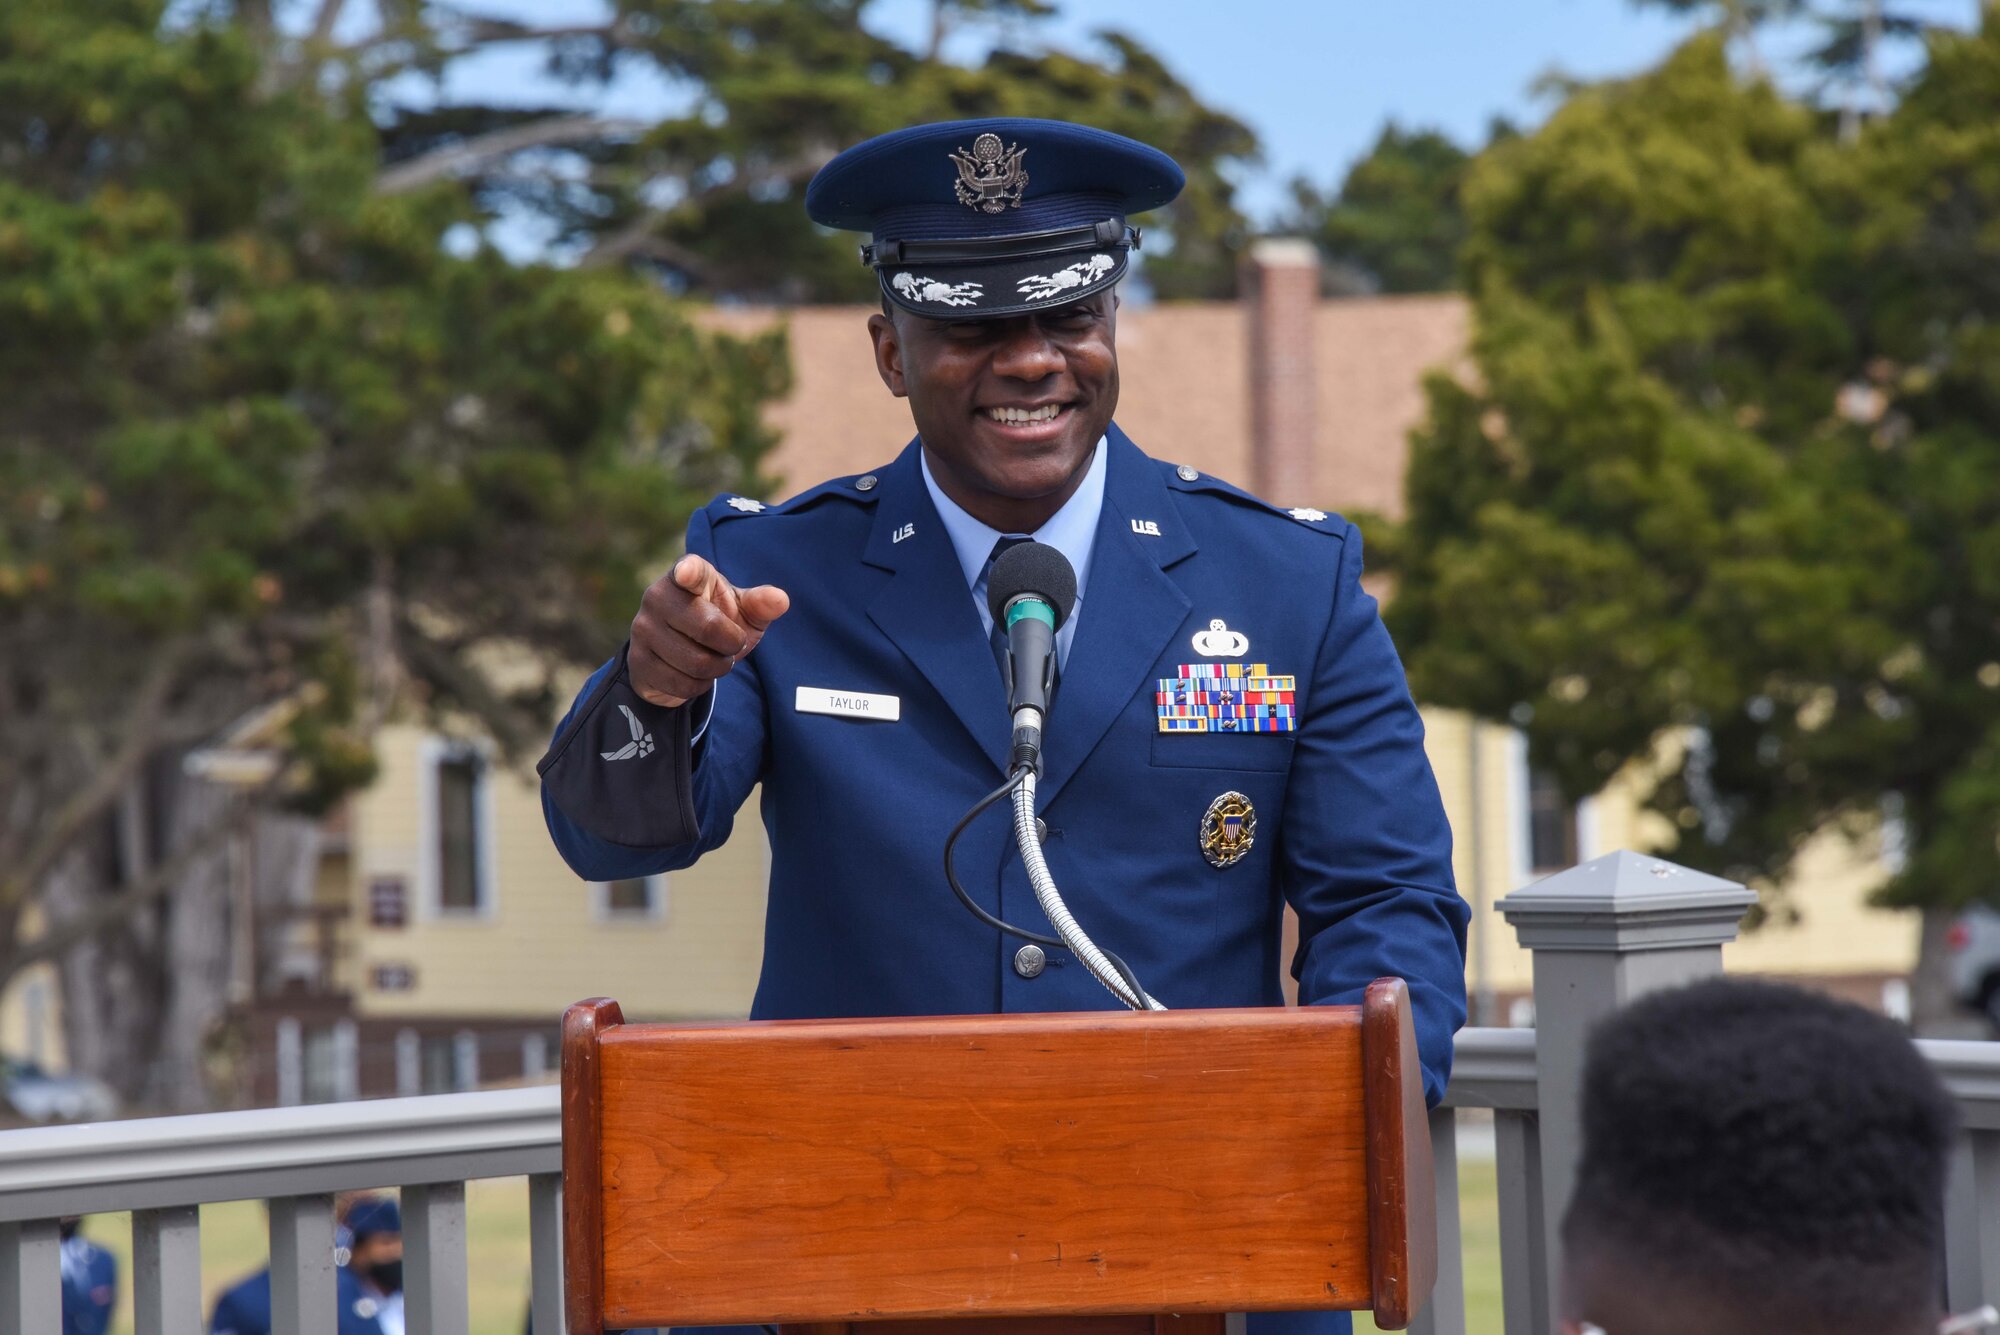 U.S. Air Force Lt. Col. William Taylor, incoming commander of the 311th Training Squadron at the Presidio of Monterey, speaks during the change of command ceremony at Soldier Field, Presidio of Monterey, California, June 4, 2021. The 311th Training Squadron develops world class language enabled warrior Airmen. (Photo courtesy of Natela Cutter)